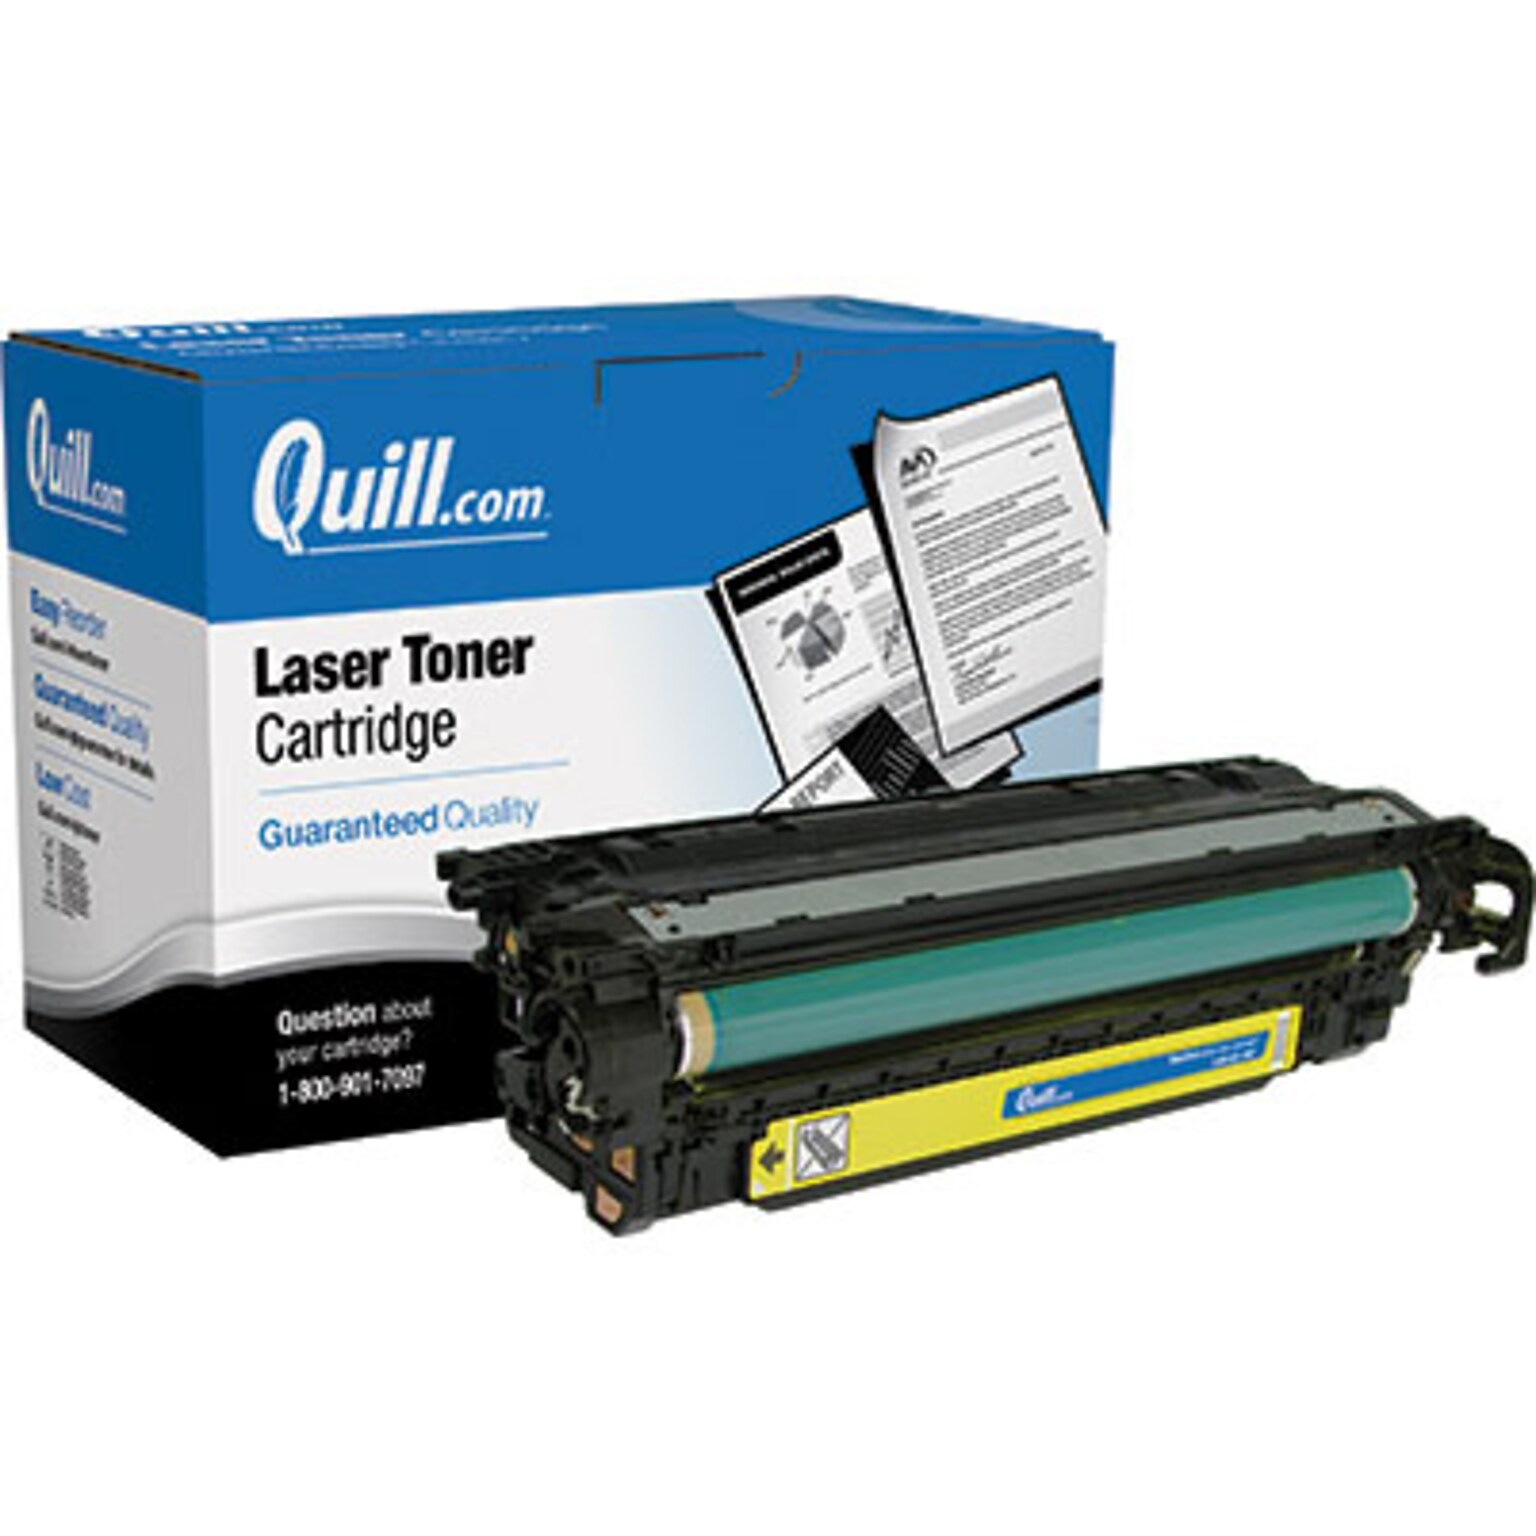 Quill Brand Remanufactured HP 504A (CE252A) Yellow Laser Toner Cartridge (100% Satisfaction Guaranteed)